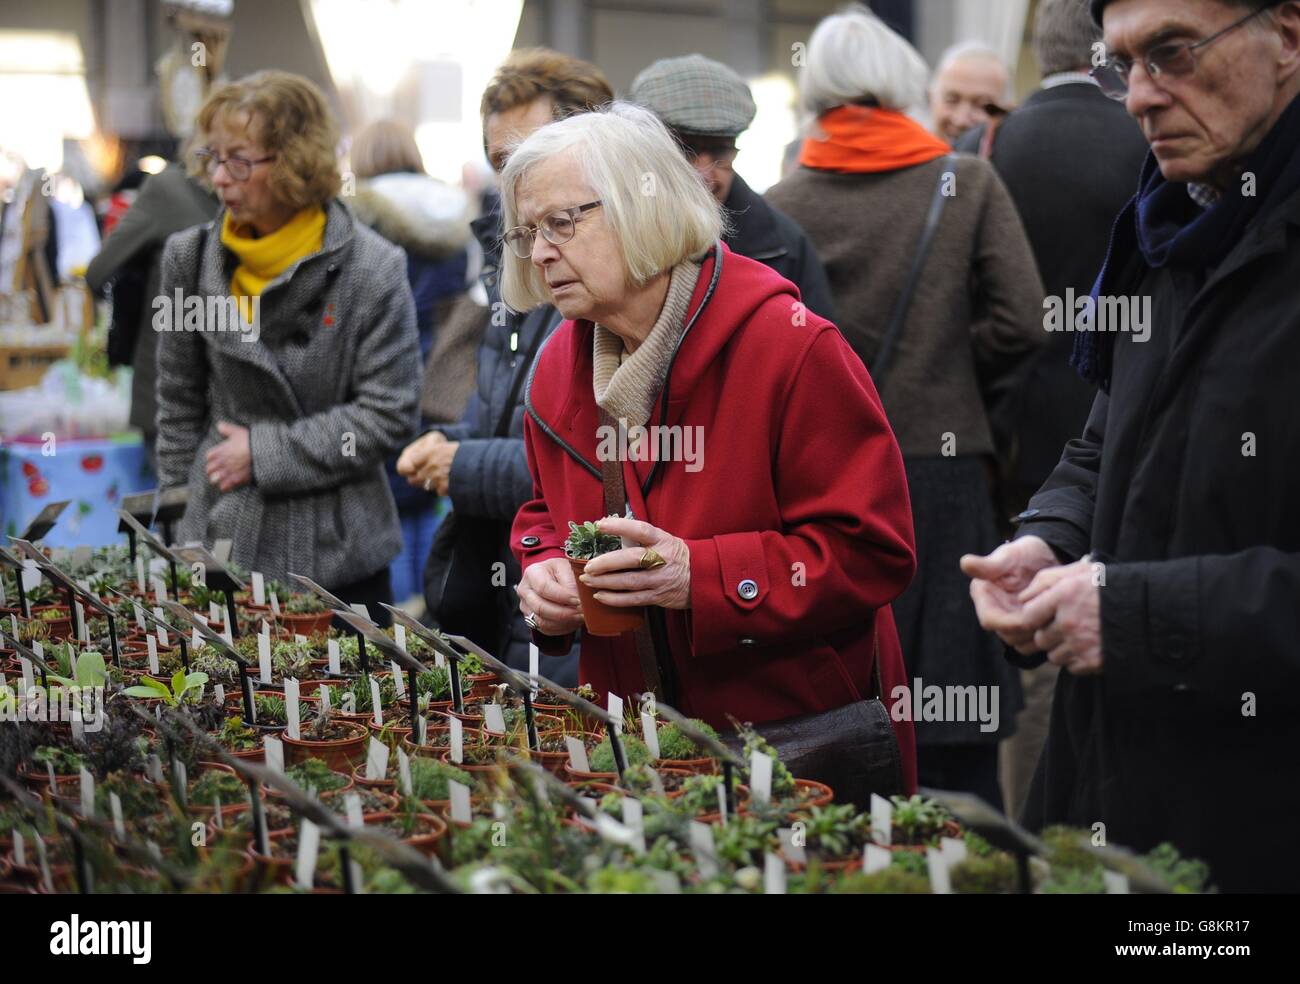 RHS London Early Spring Plant Fair. Visitors attend the RHS London Early Spring Plant Fair at the RHS Horticultural Halls in central London. Stock Photo